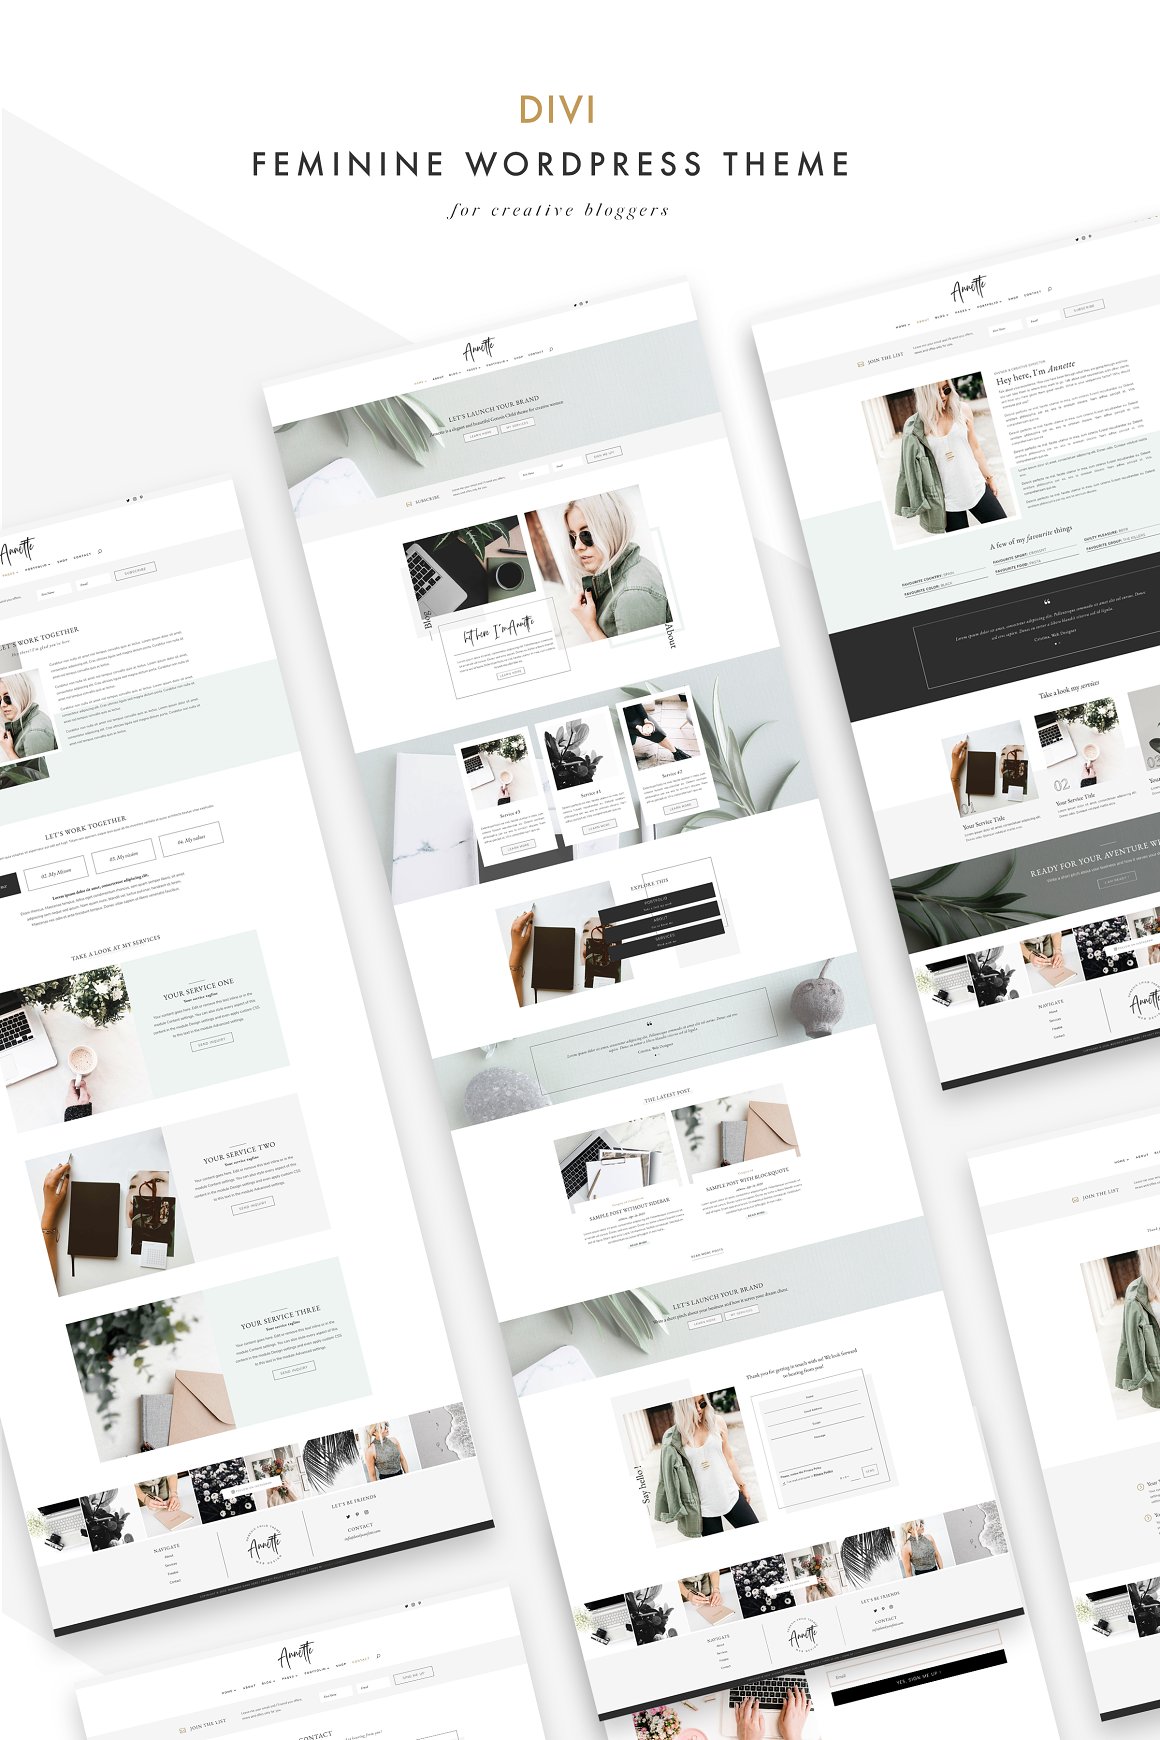 A lot of different divi feminine wordpress theme templates on a gray-white background.